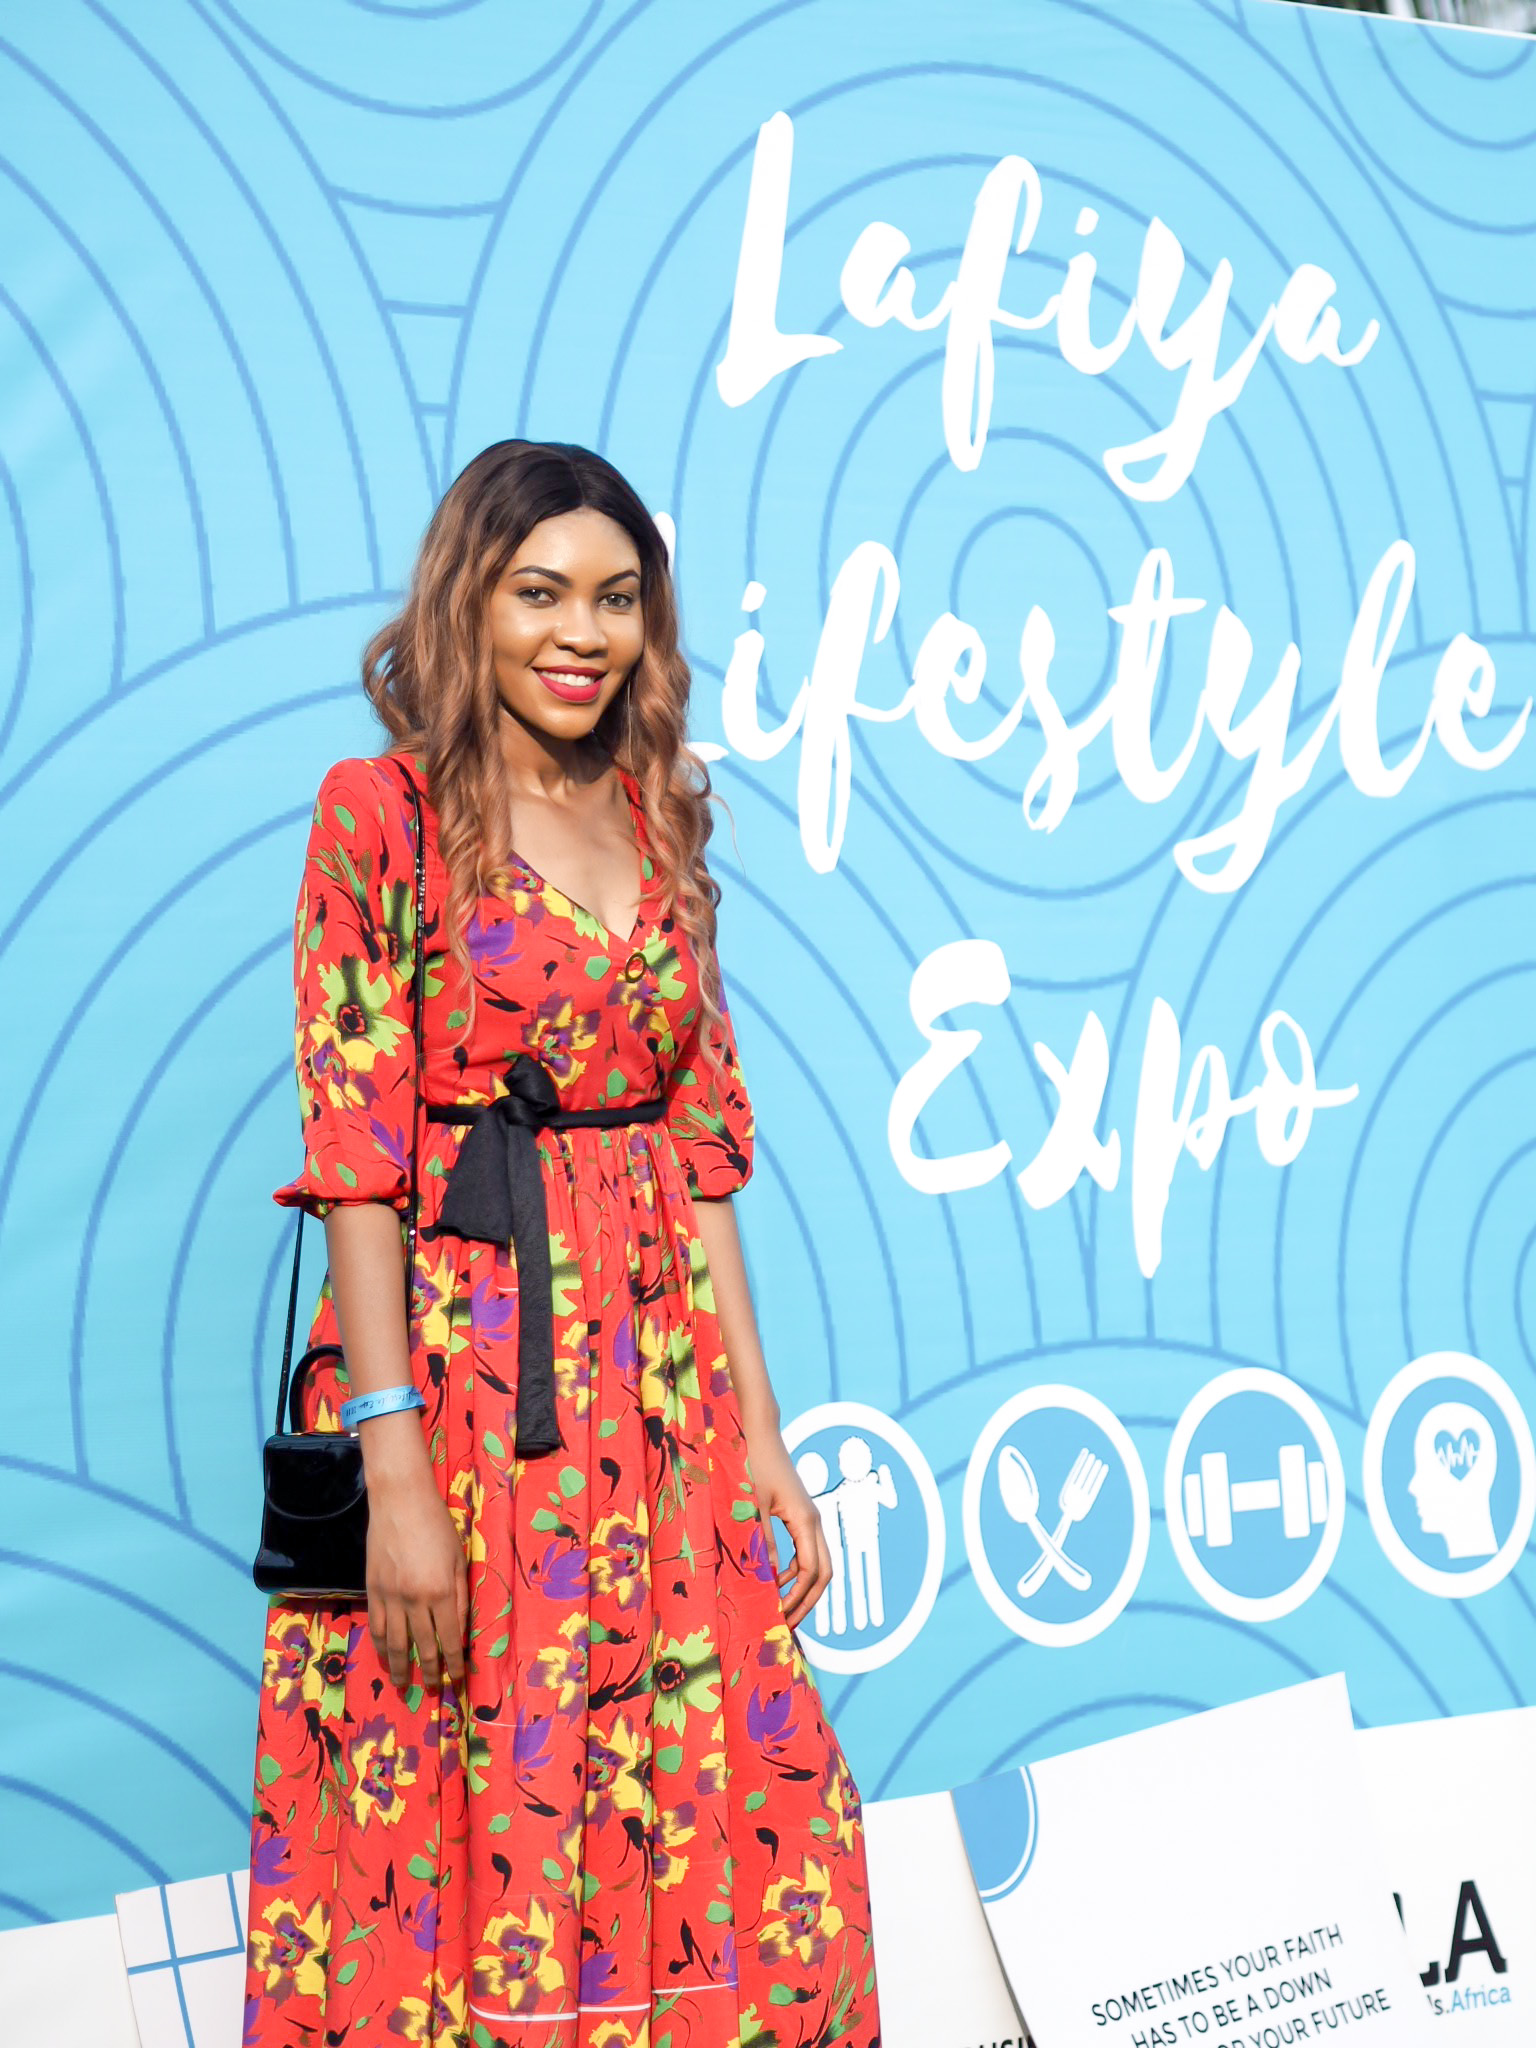 She leads Africa Lafiya lifestyle expo 2018 in Abuja 